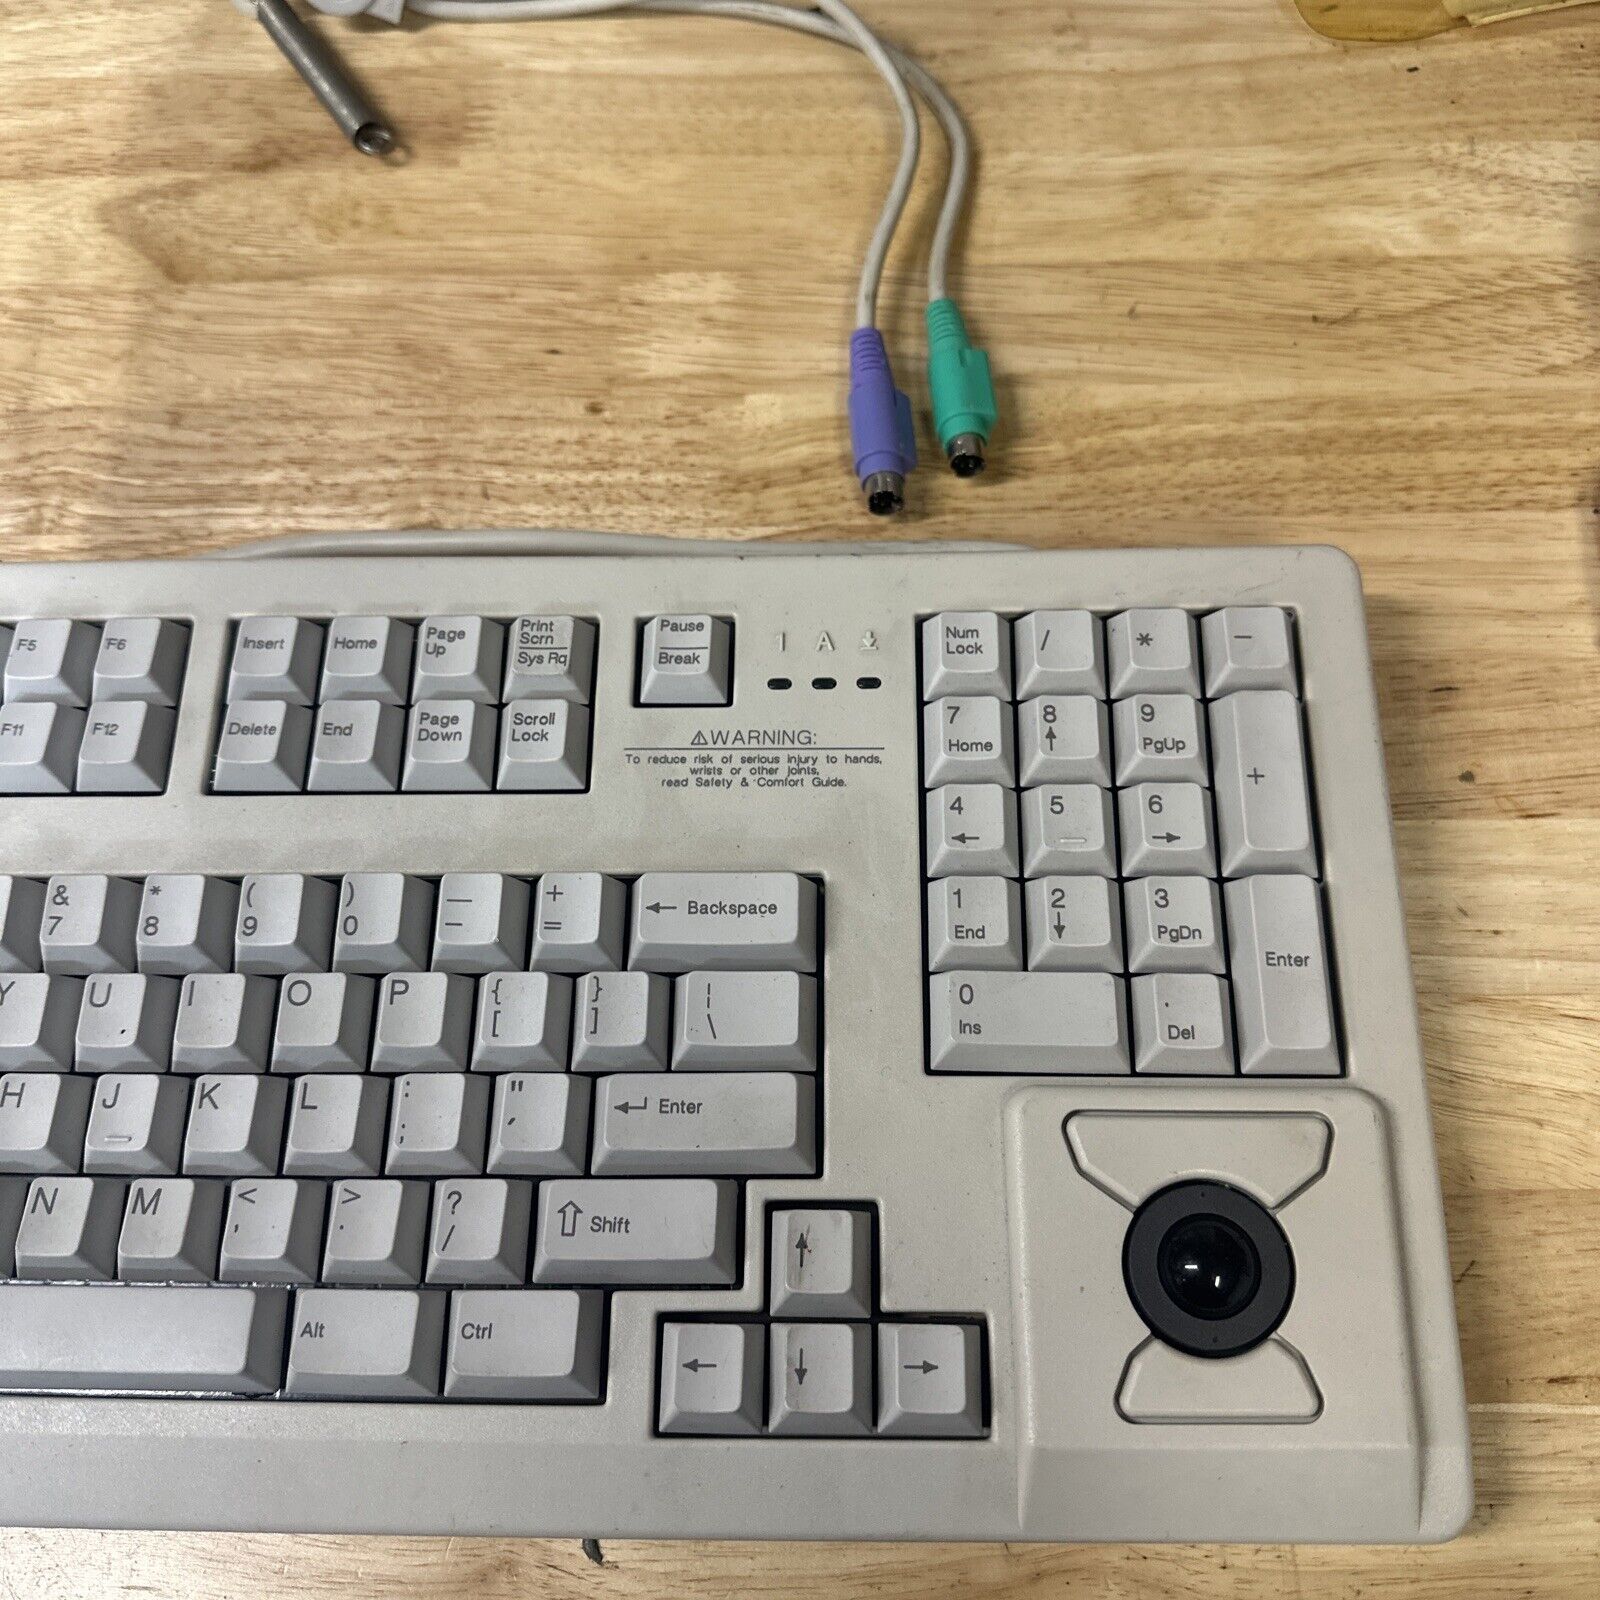 Compaq MX 11800 Mechanical PS2 Keyboard w/ Integrated Trackball Mouse Used 